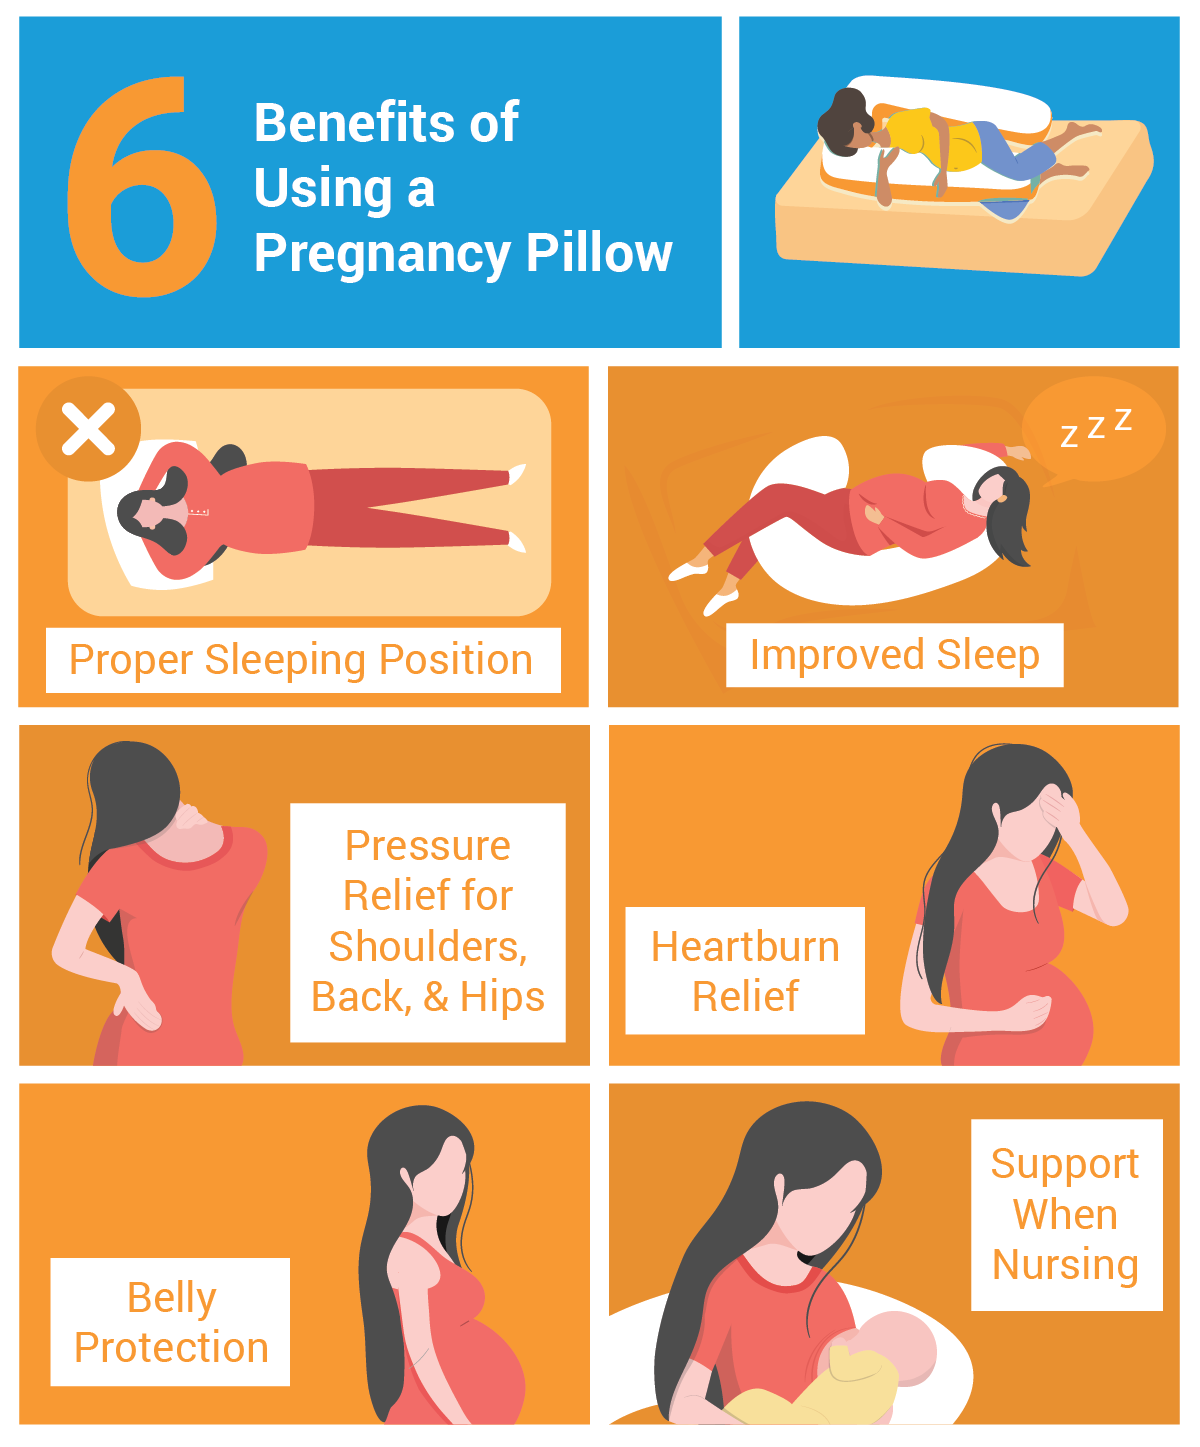 benefits of pregnancy pillow infographic 